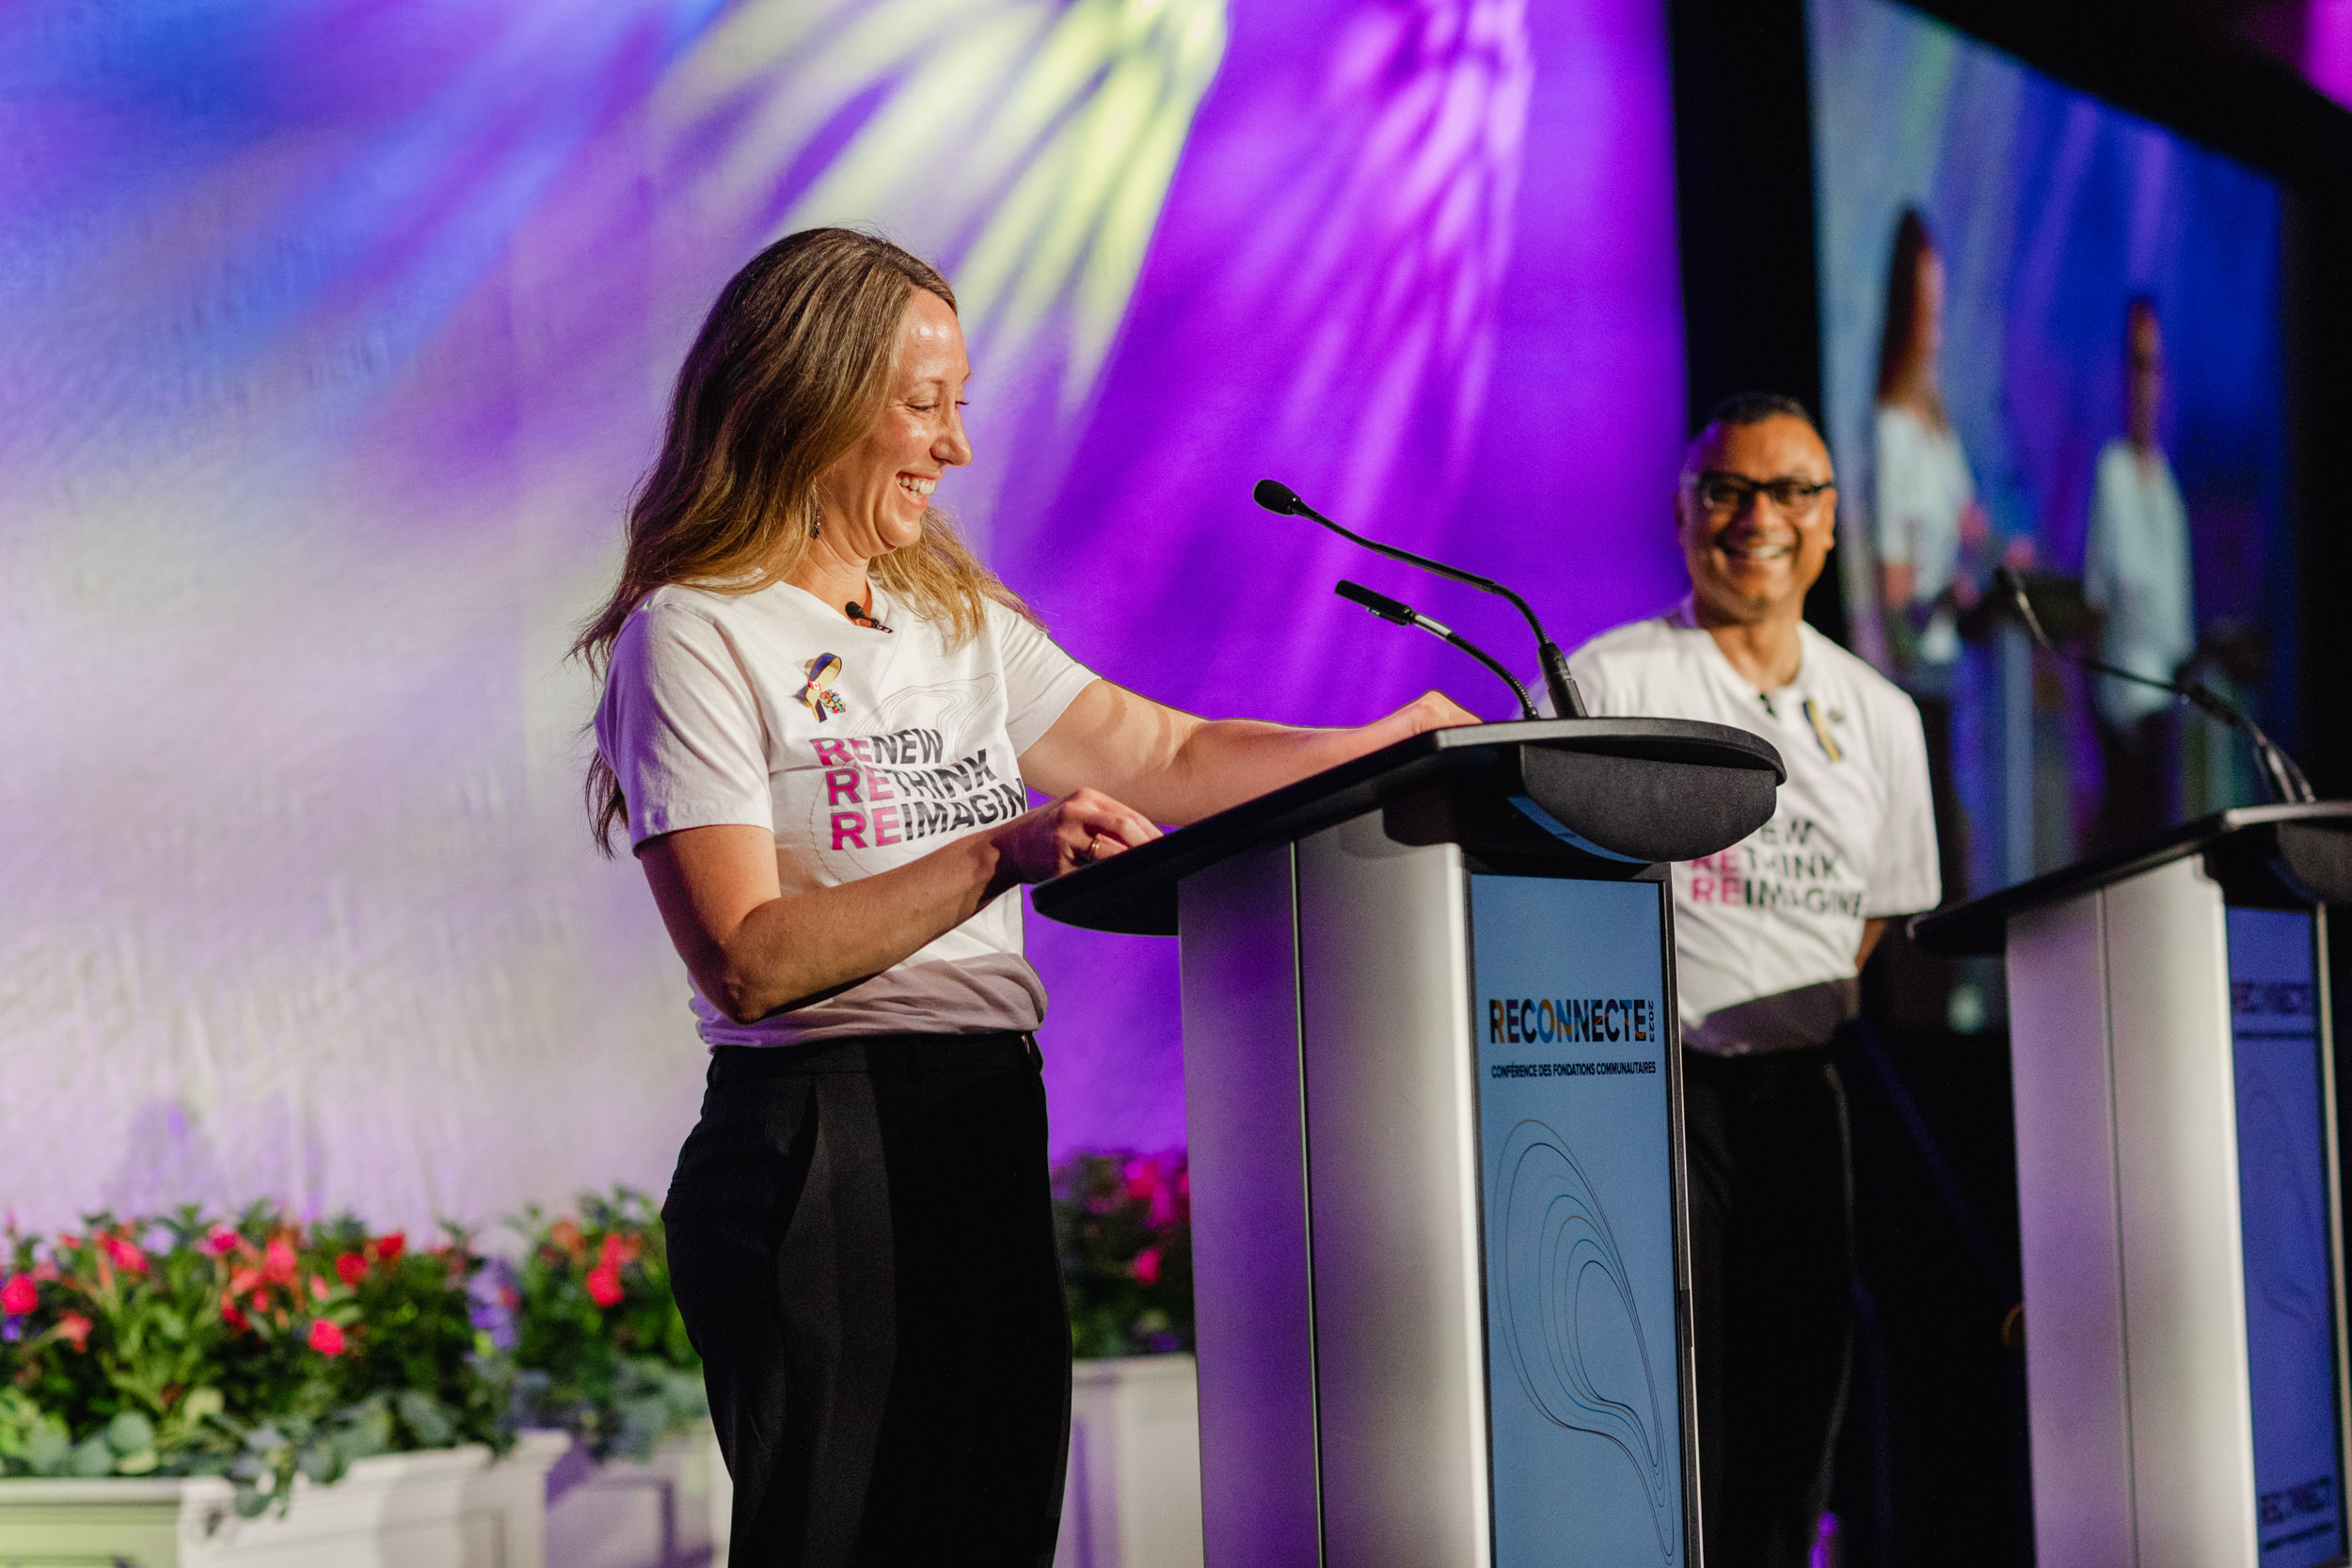 Conference photography of two women standing at podiums in front of a stage.